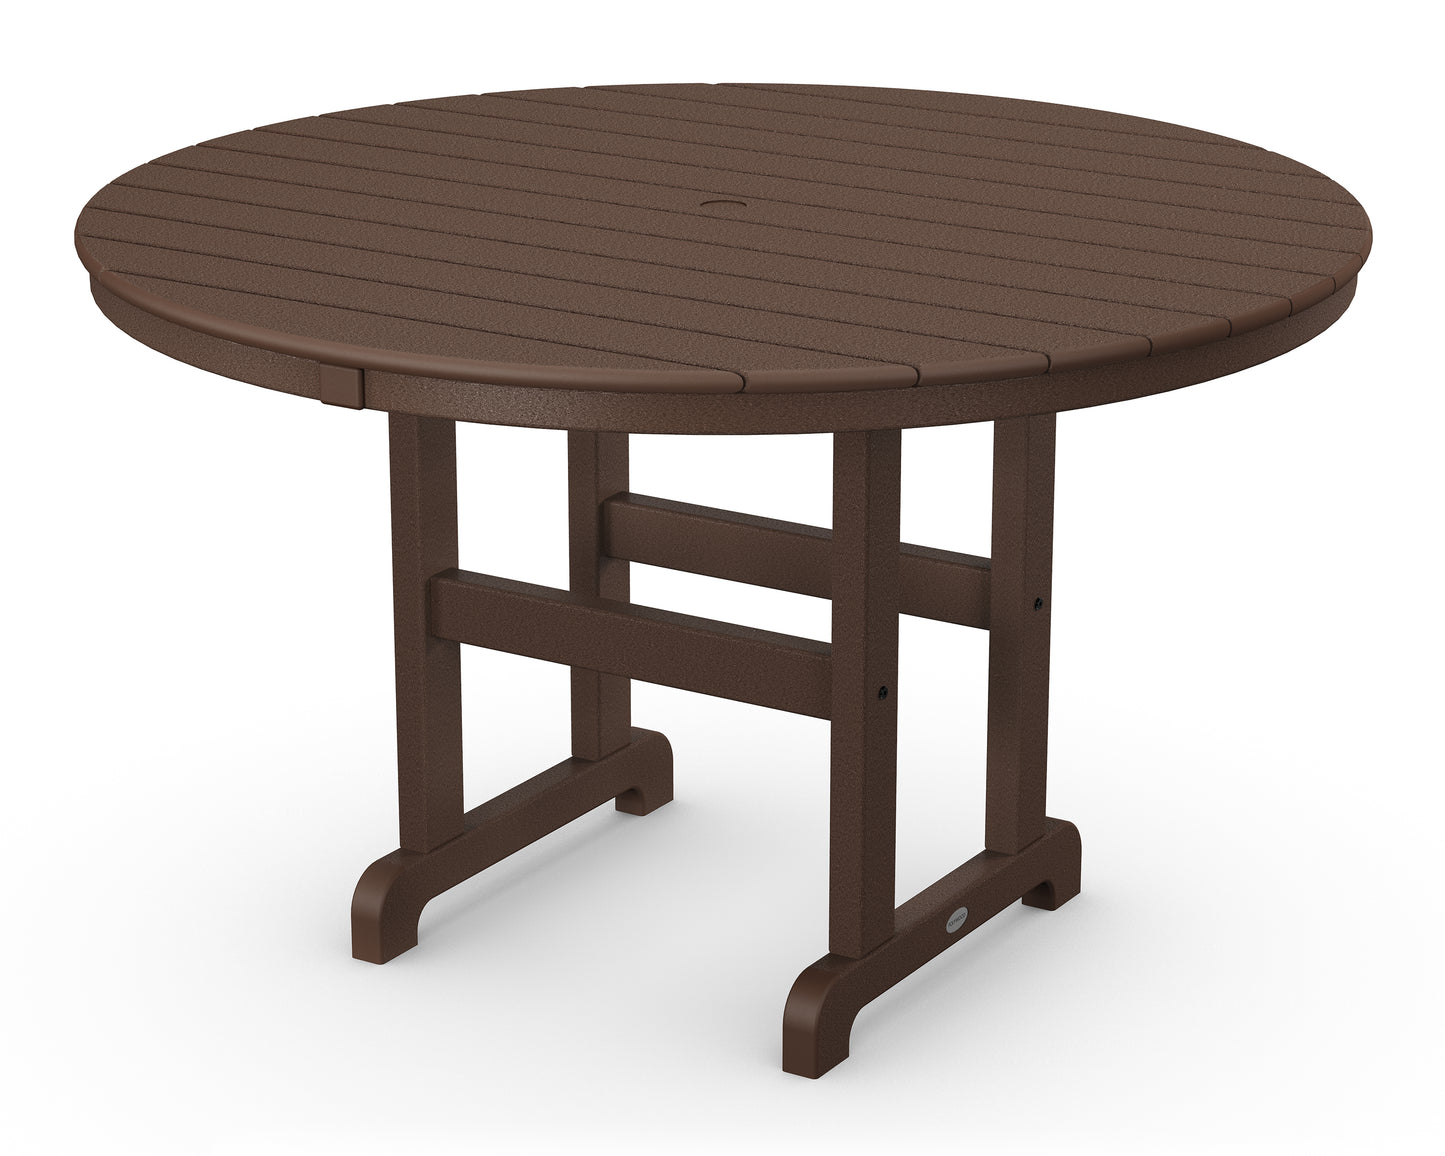 Polywood 48" Round Dining Table